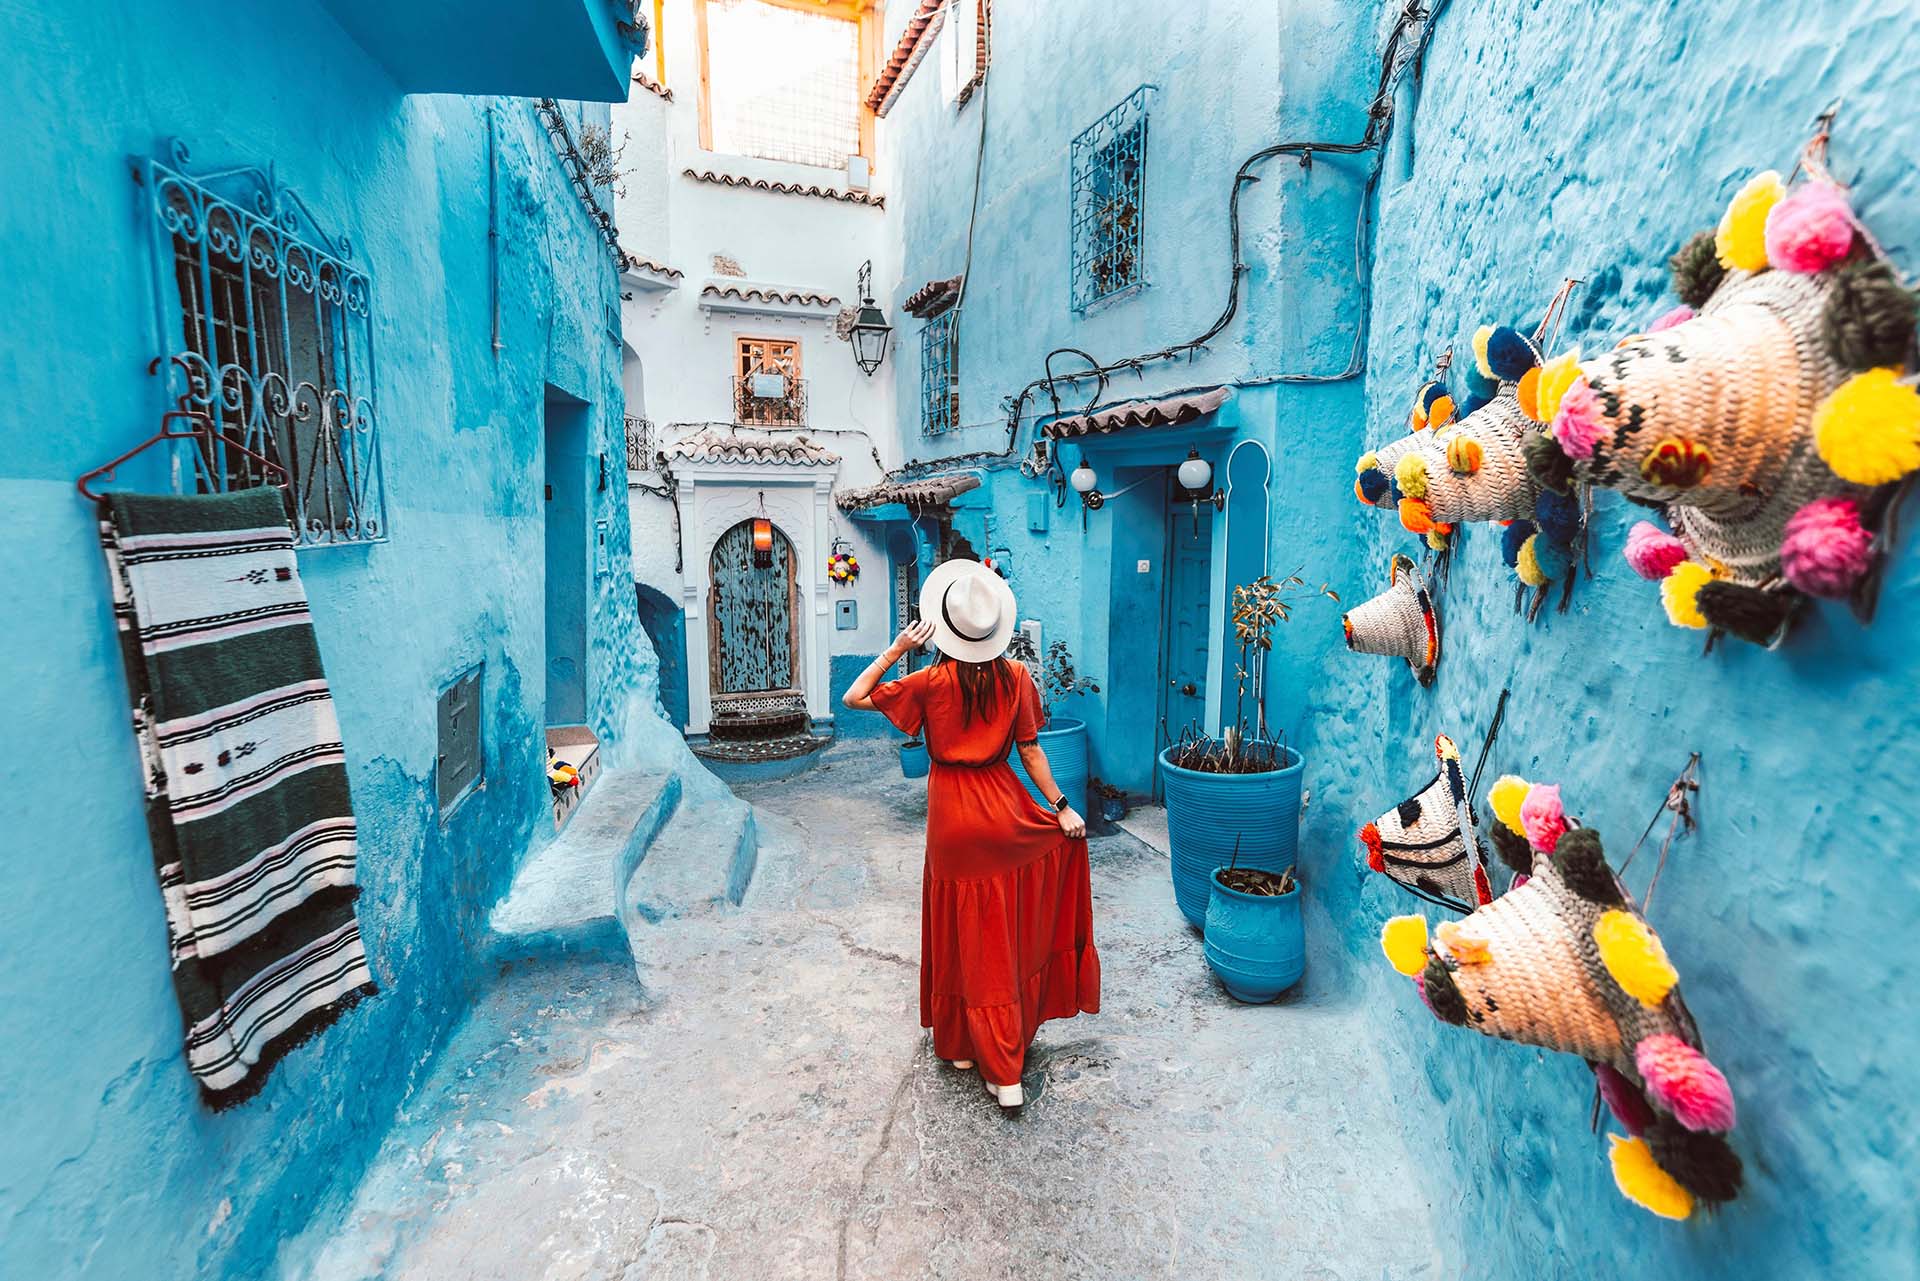 A woman in a vibrant red dress strolls through the picturesque streets of Chefchaouen - Wonders of Morocco - Sisterhood Travels